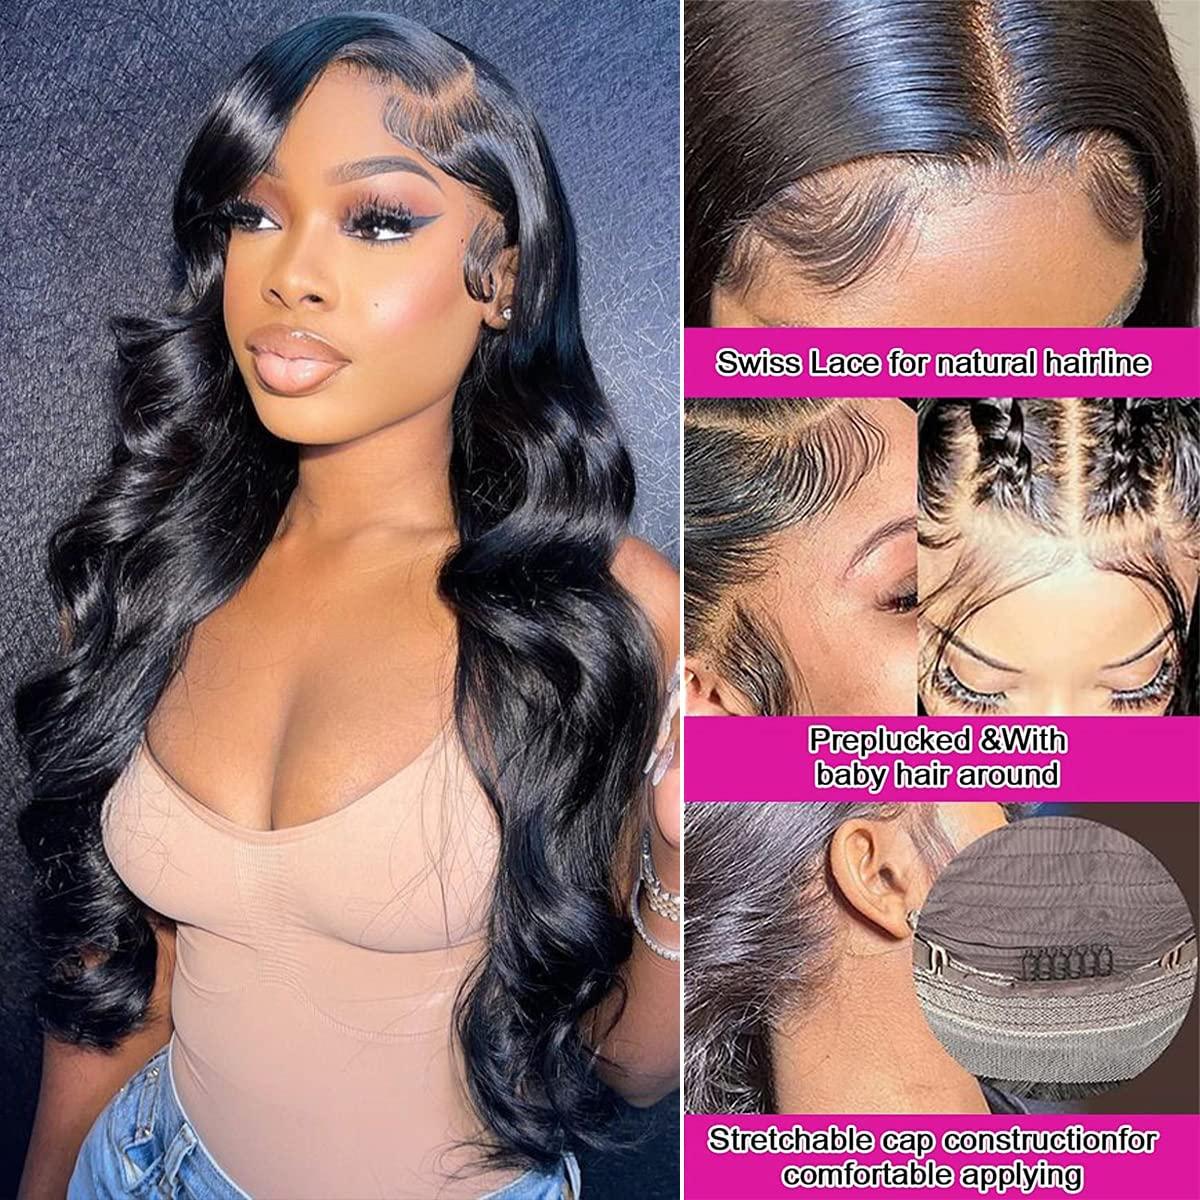 How to Wear a Lace Front Wig—Without Damage